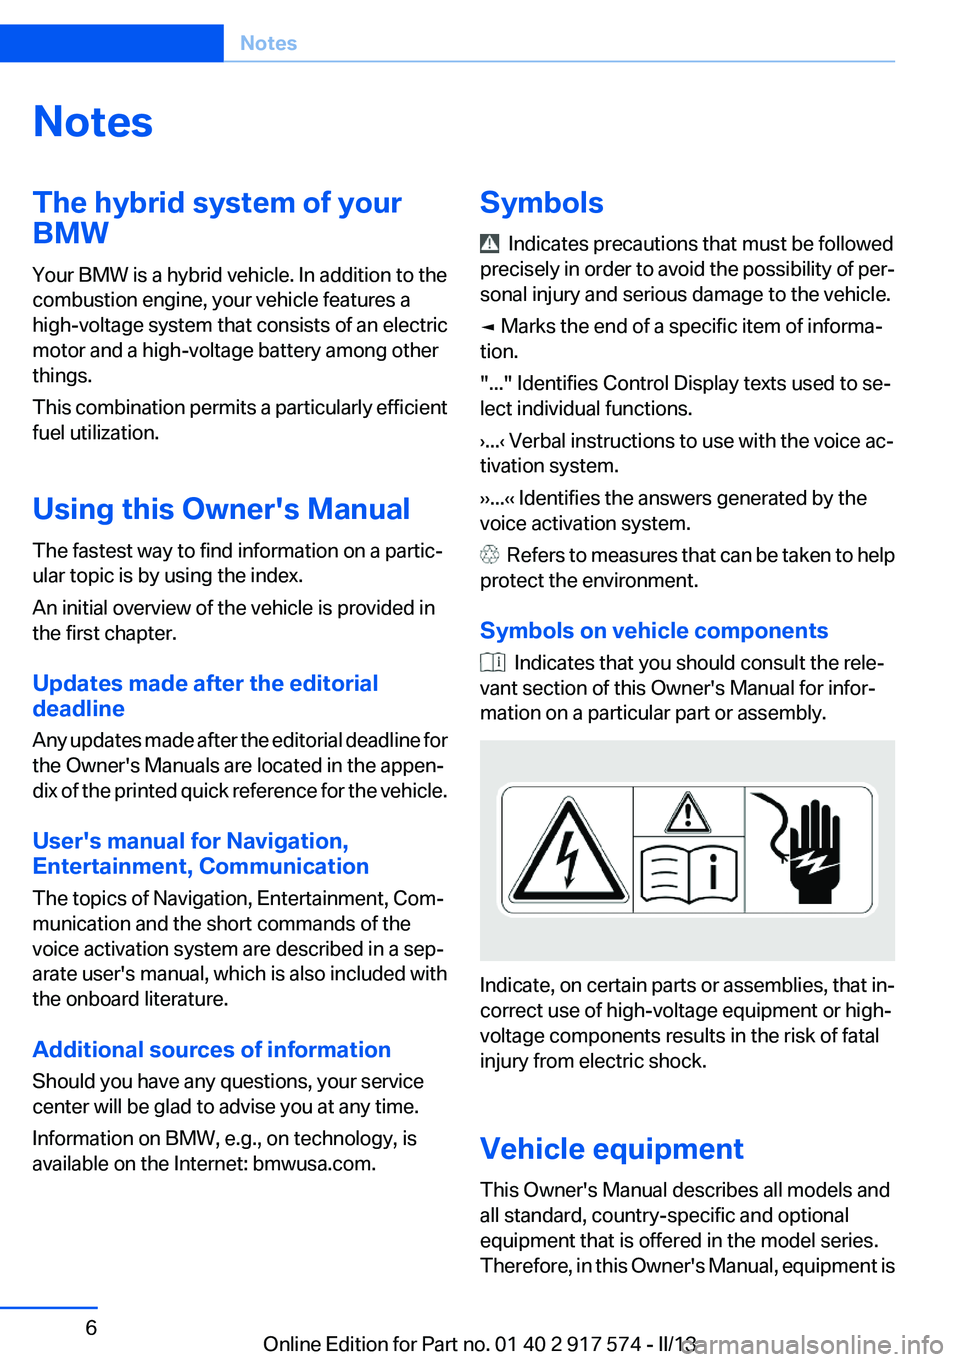 BMW ACTIVEHYBRID5 2013  Owners Manual NotesThe hybrid system of your
BMW
Your BMW is a hybrid vehicle. In addition to the
combustion engine, your vehicle features a
high-voltage system that consists of an electric
motor and a high-voltage